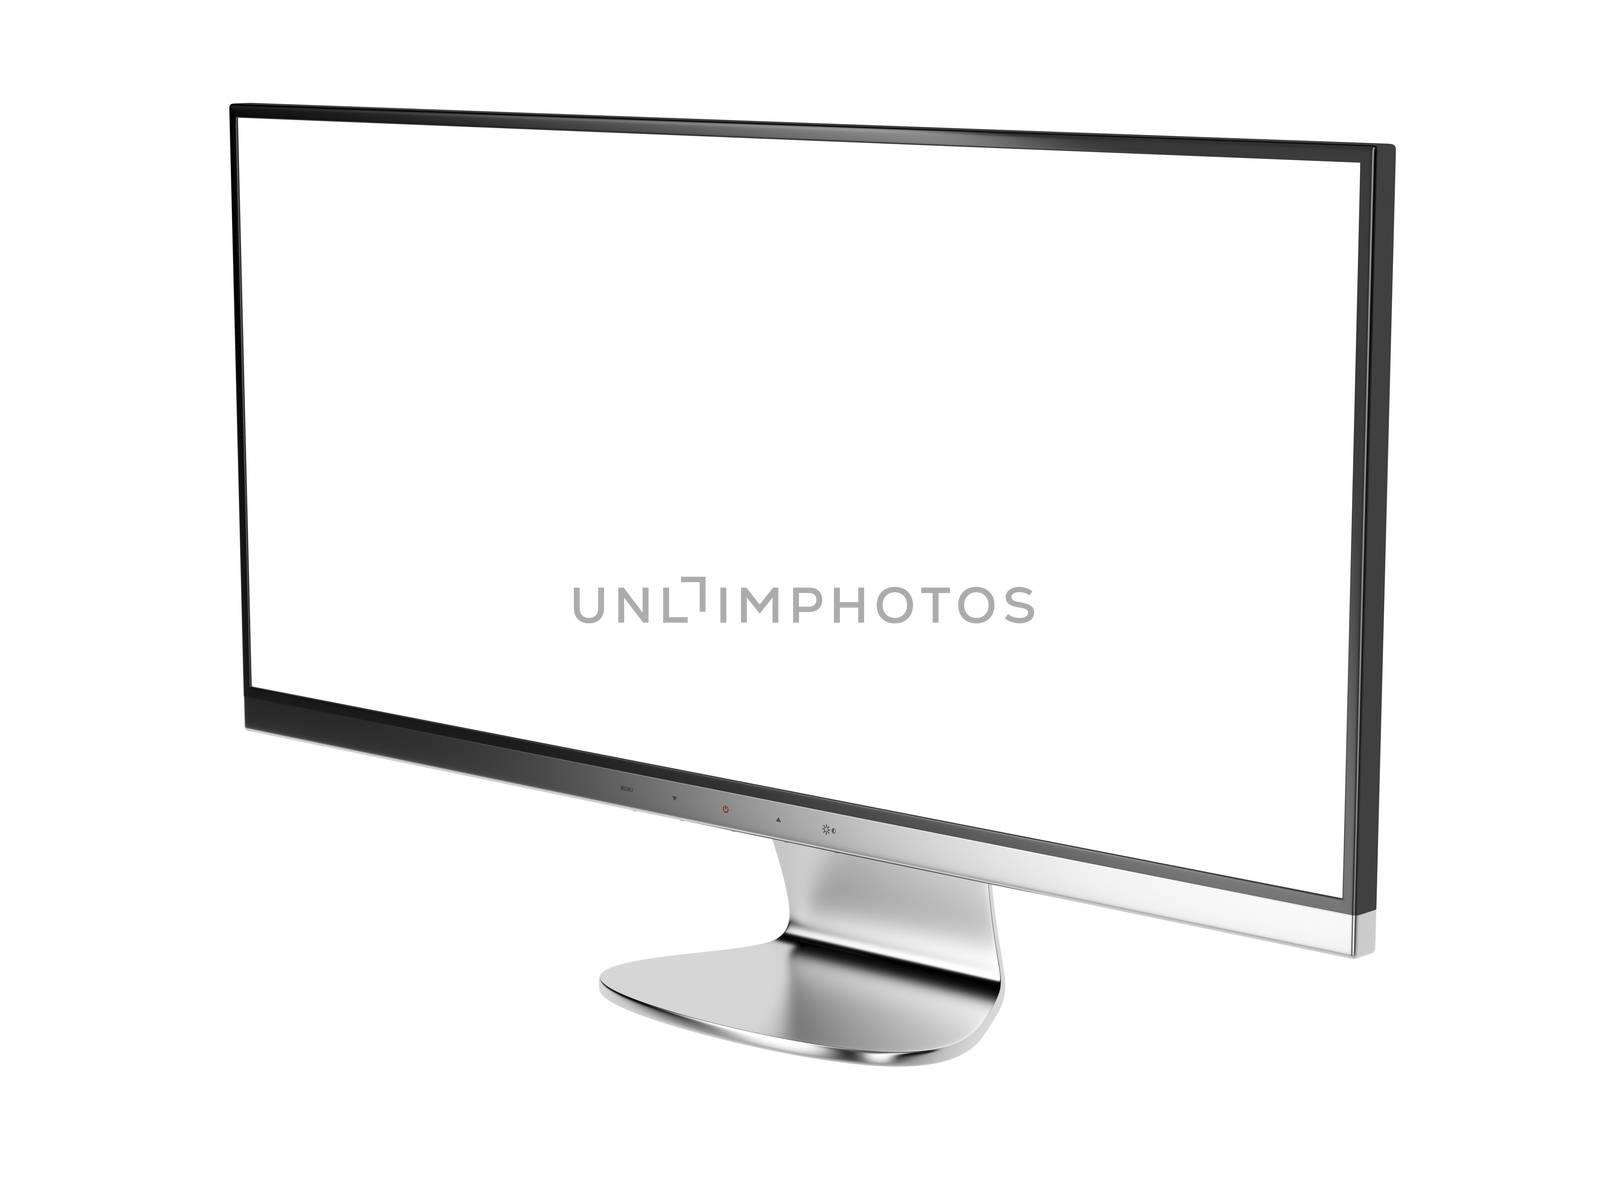 Ultra wide (21:9) computer monitor with white screen, isolated on white